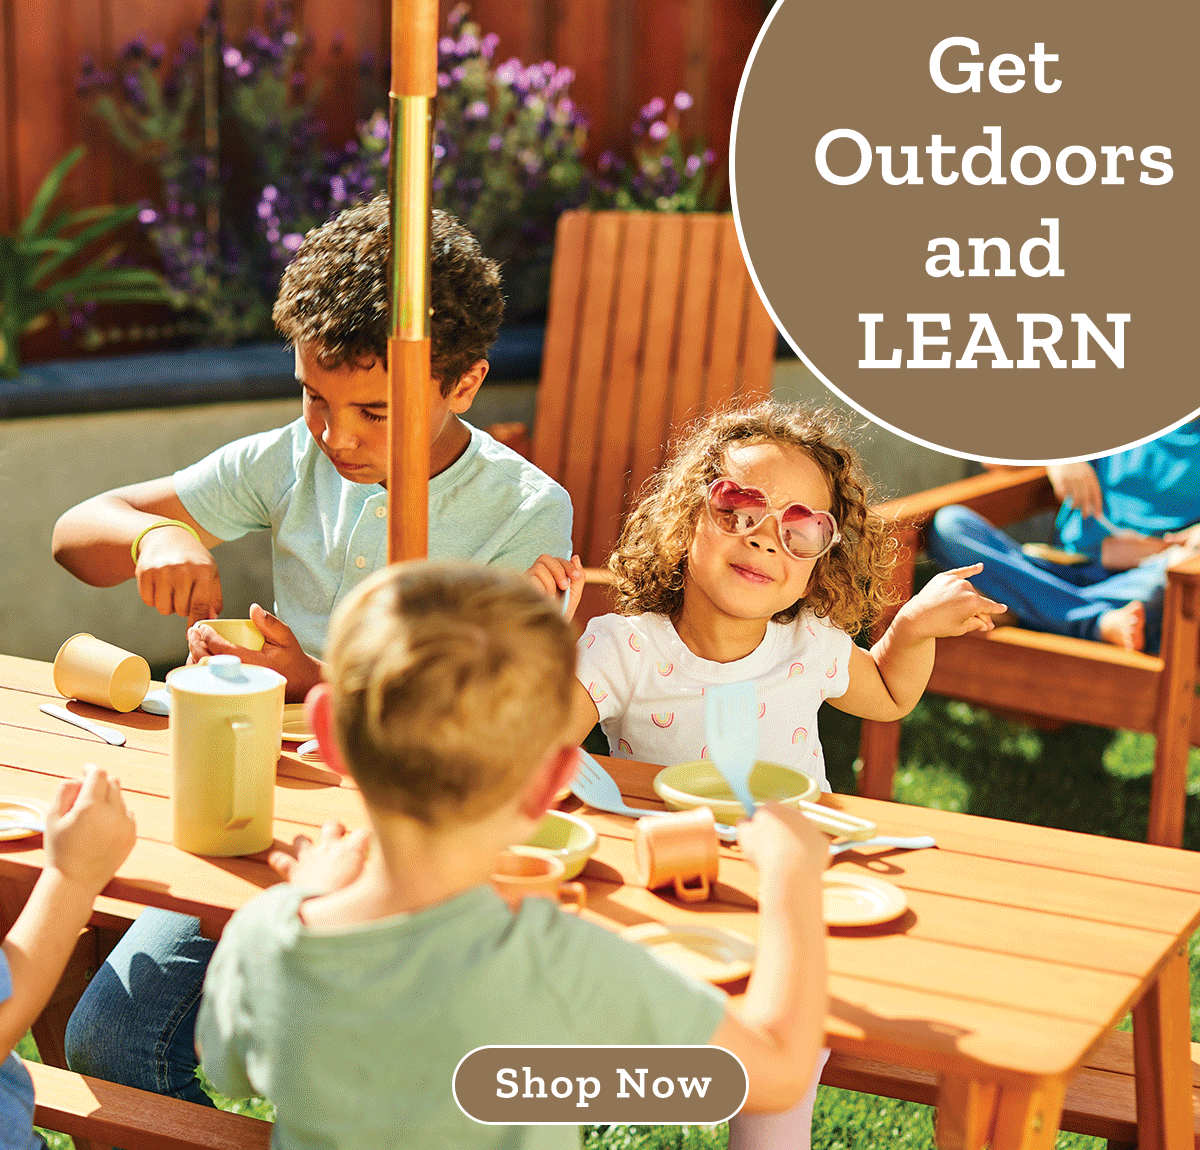 Get outdoors and LEARN with these must-haves